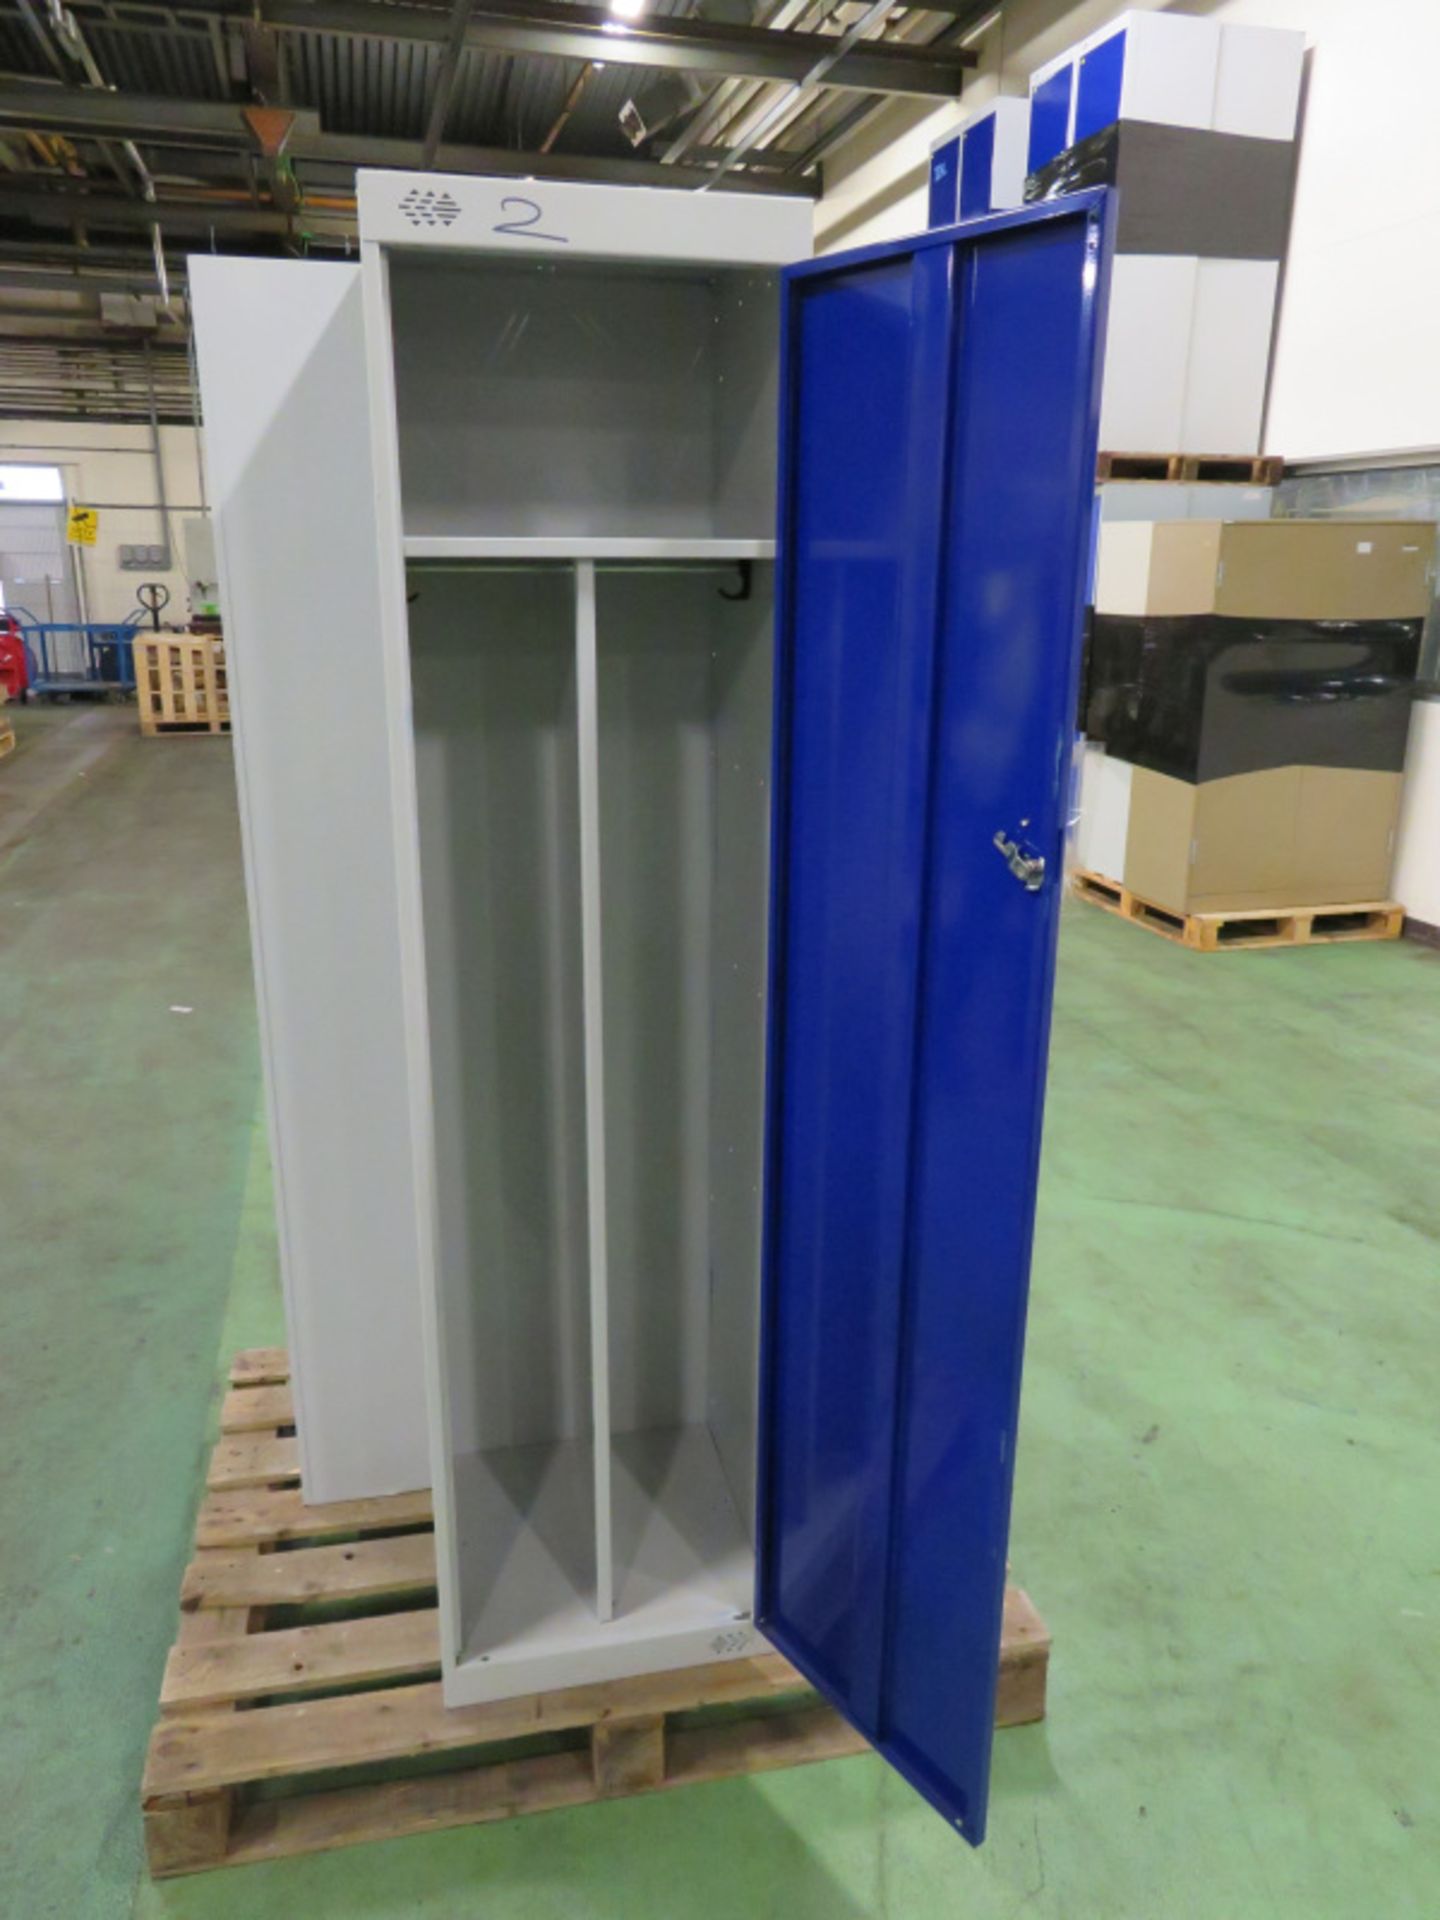 3x Metal Grey / Blue Lockers L 450mm x W 450mm x H1800mm - Image 6 of 6